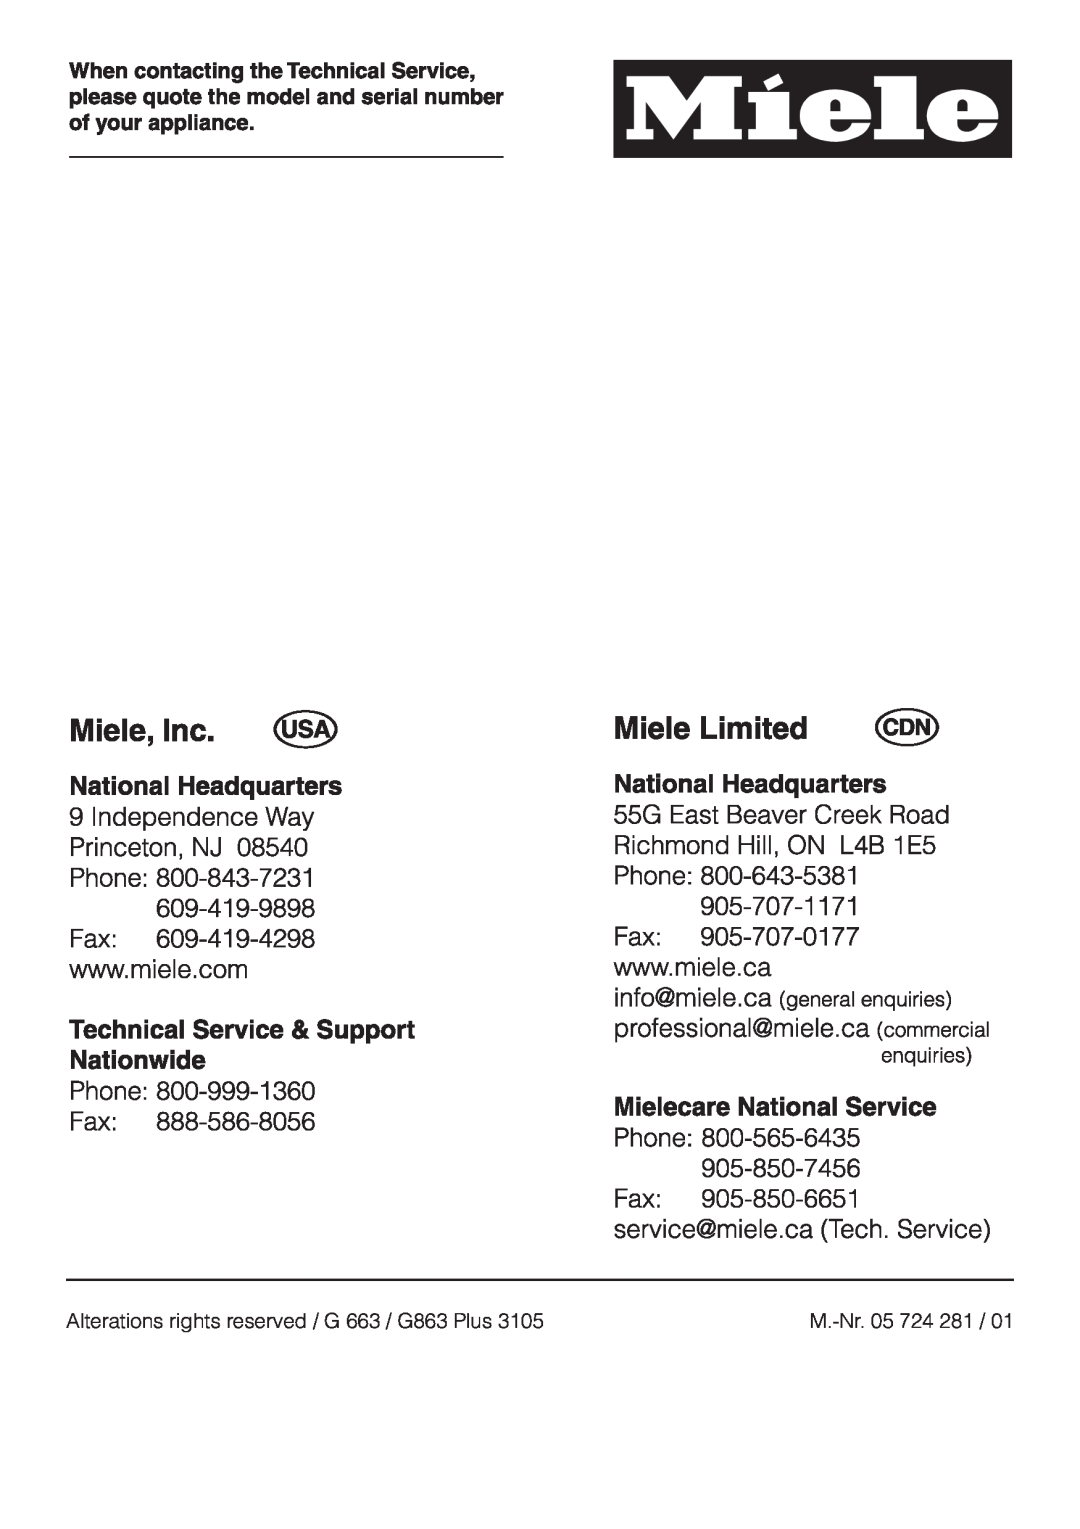 Miele G 663 Plus, G 863 Plus, 05-724-281 Alterations rights reserved / G 663 / G863 Plus, M.-Nr.05 724 